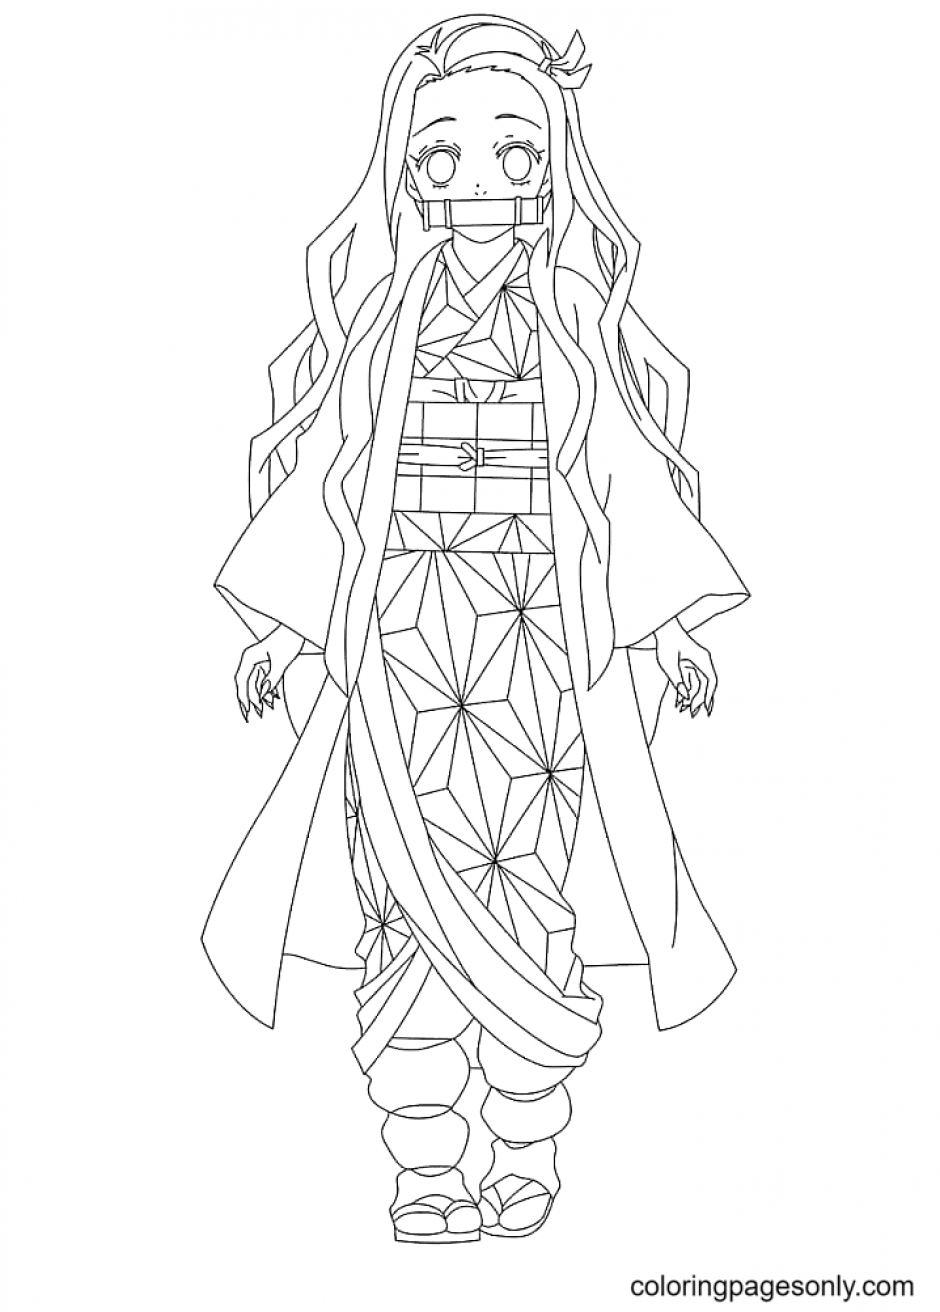 Nezuko Coloring Pages gives you the image of a fragile